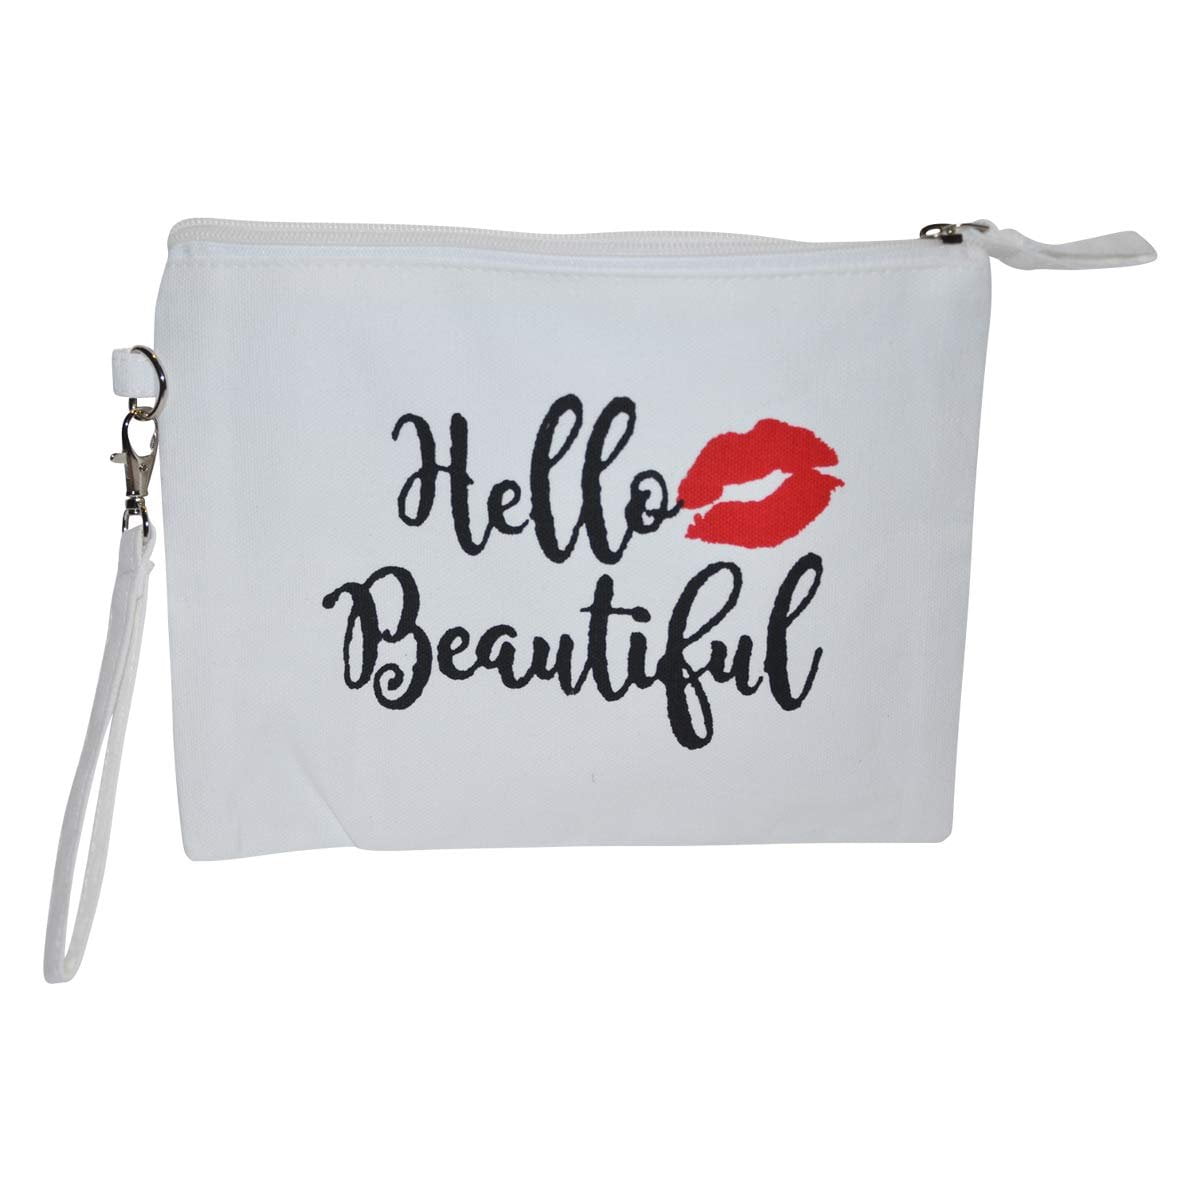 Cosmetic Bag with Sayings - Large Funny Makeup Bags - Womens Gift Makeup  Bags with Quotes - Cute Storage Bag for Travel - Funny Pack for Women Hello  Beautiful 